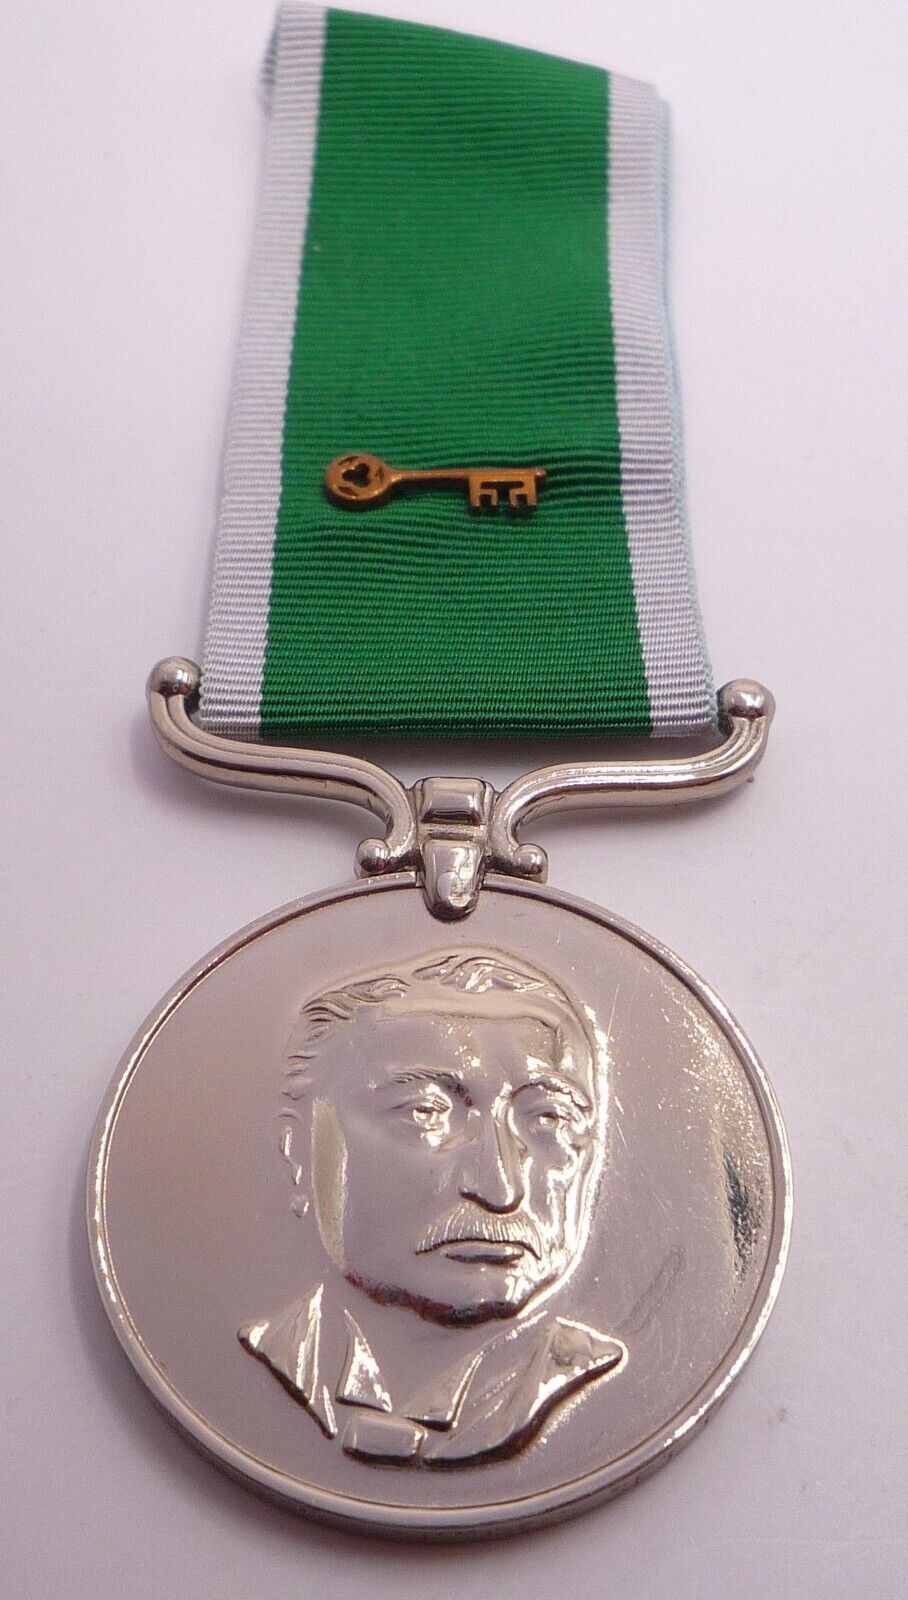 RHODESIA PRISON SERVICE FOR SERVICE MEDAL 1965 - 1968 WITH EMBLEM COLLECTORS SET